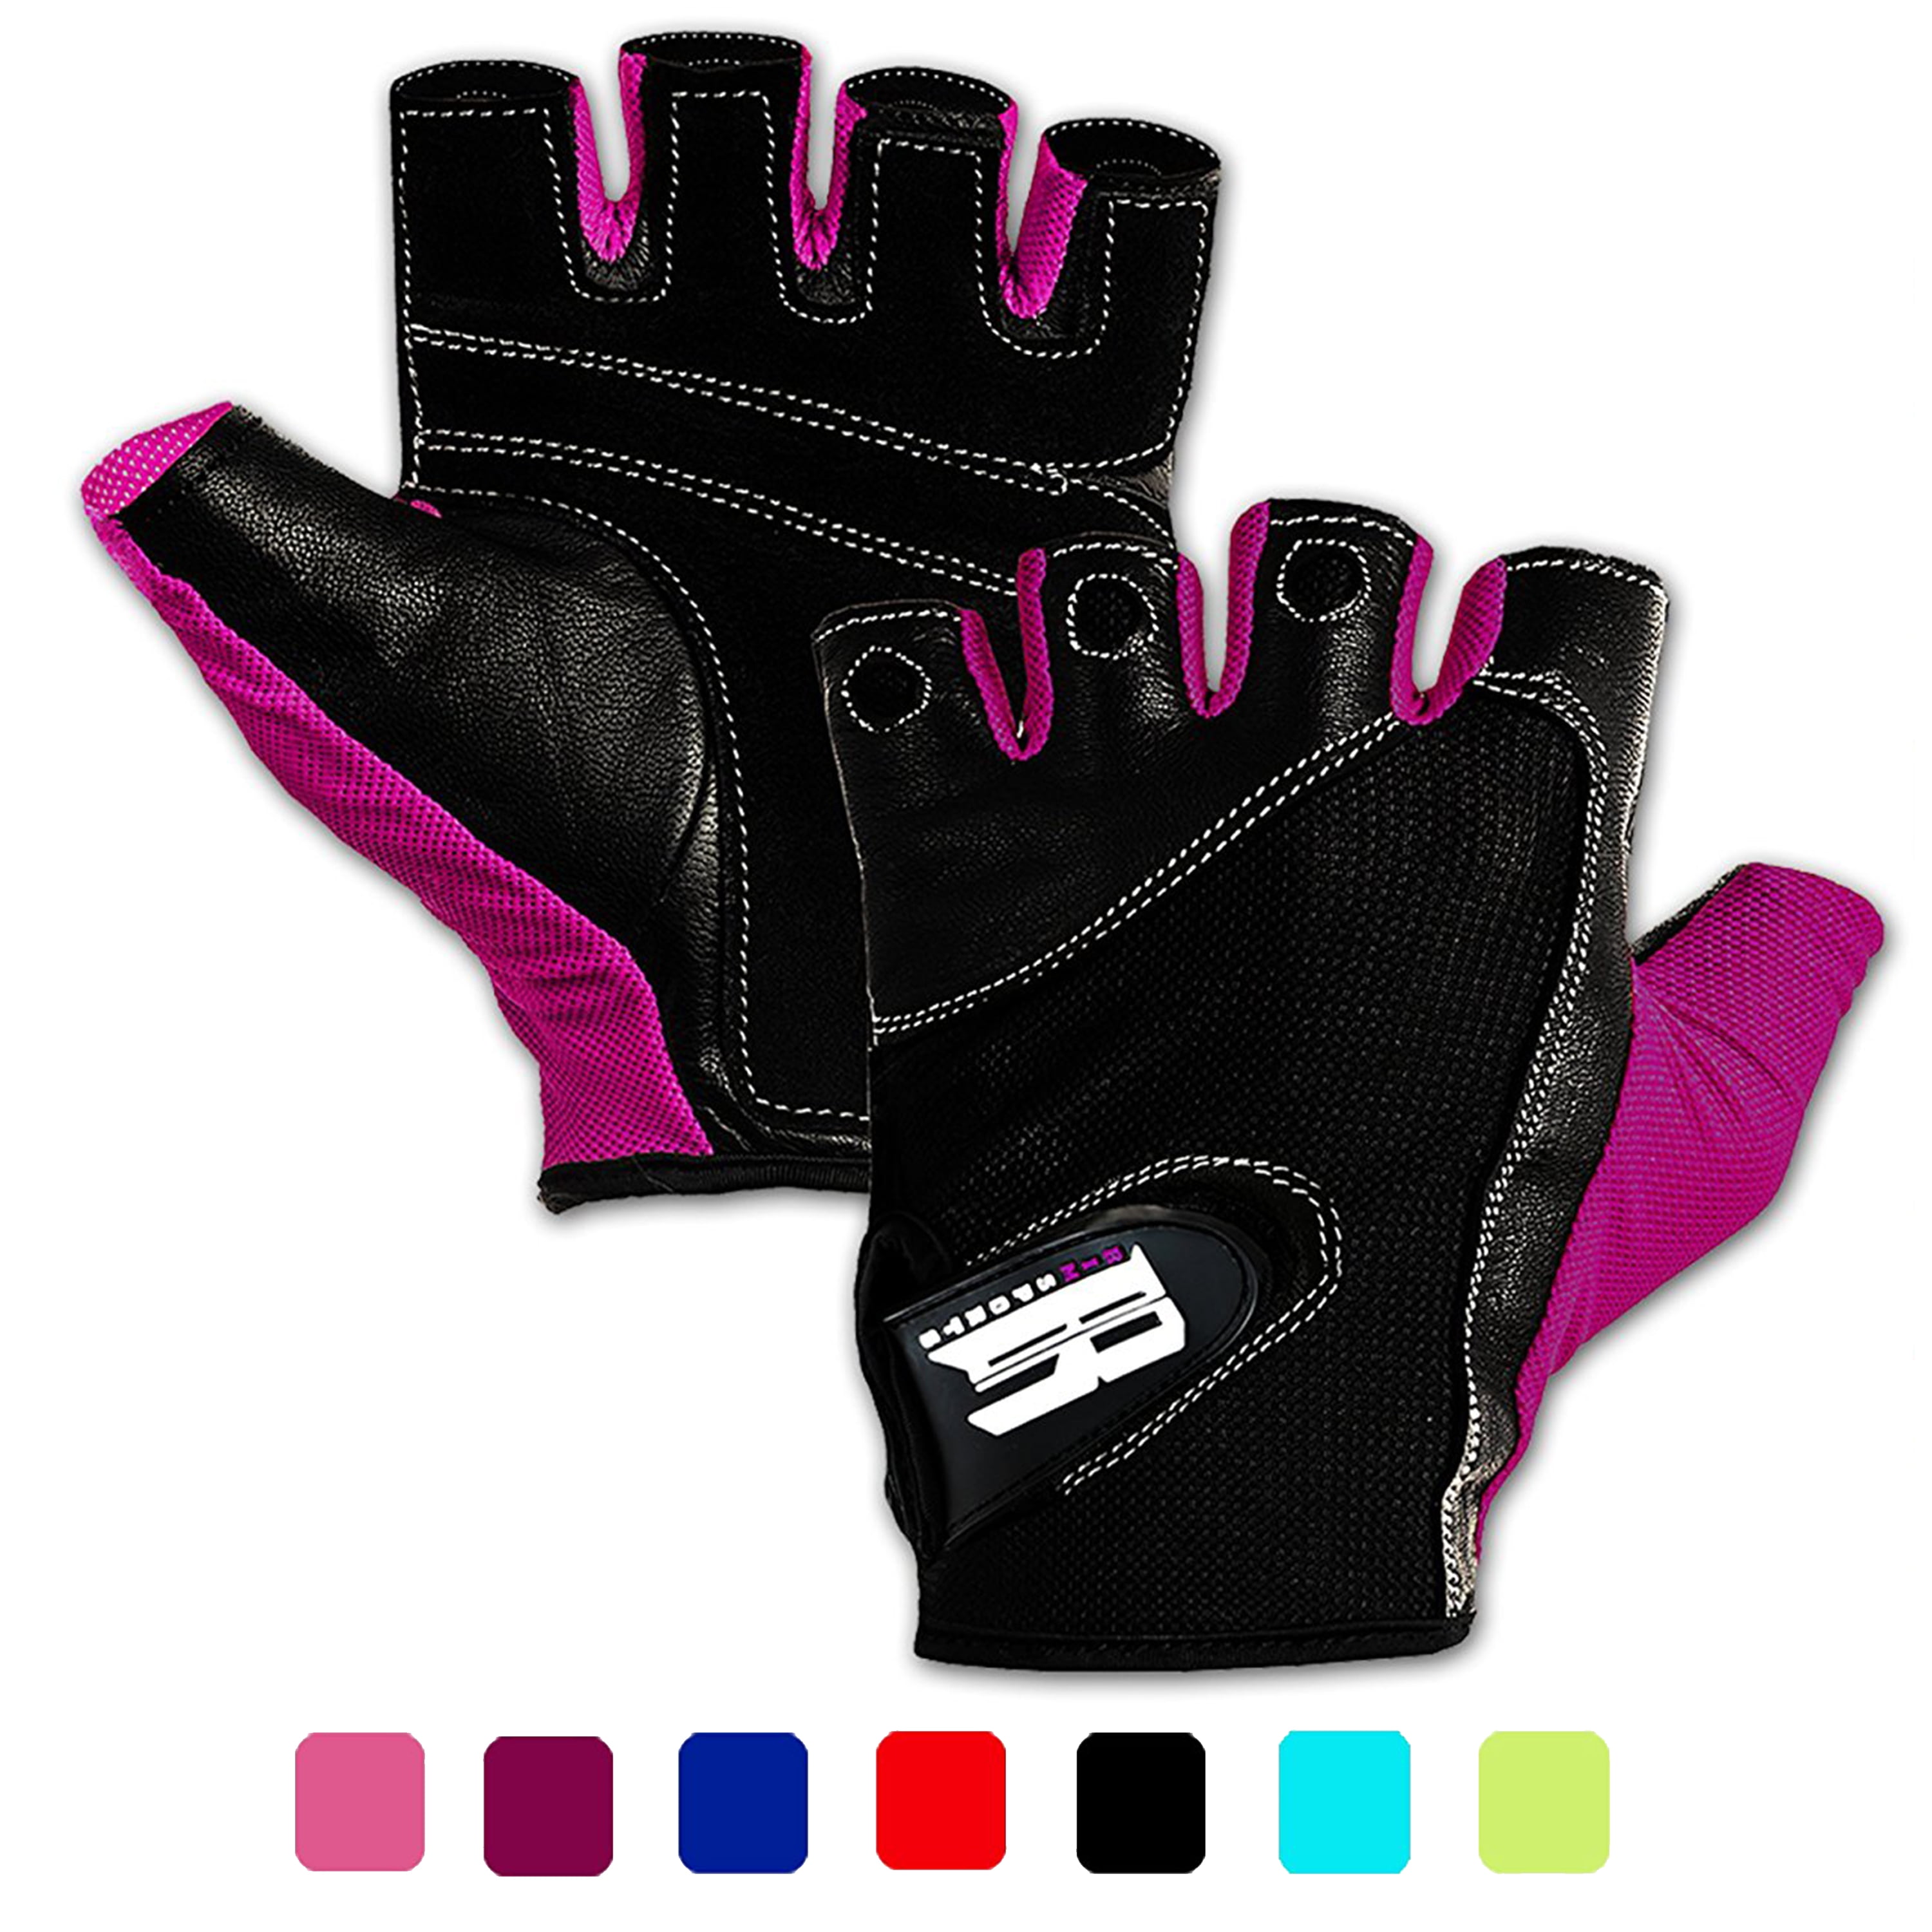 FINGERLESS WEIGHT LIFTING EXERCISE GYM WHEELCHAIR MESH LEATHER PADDED GLOVES 